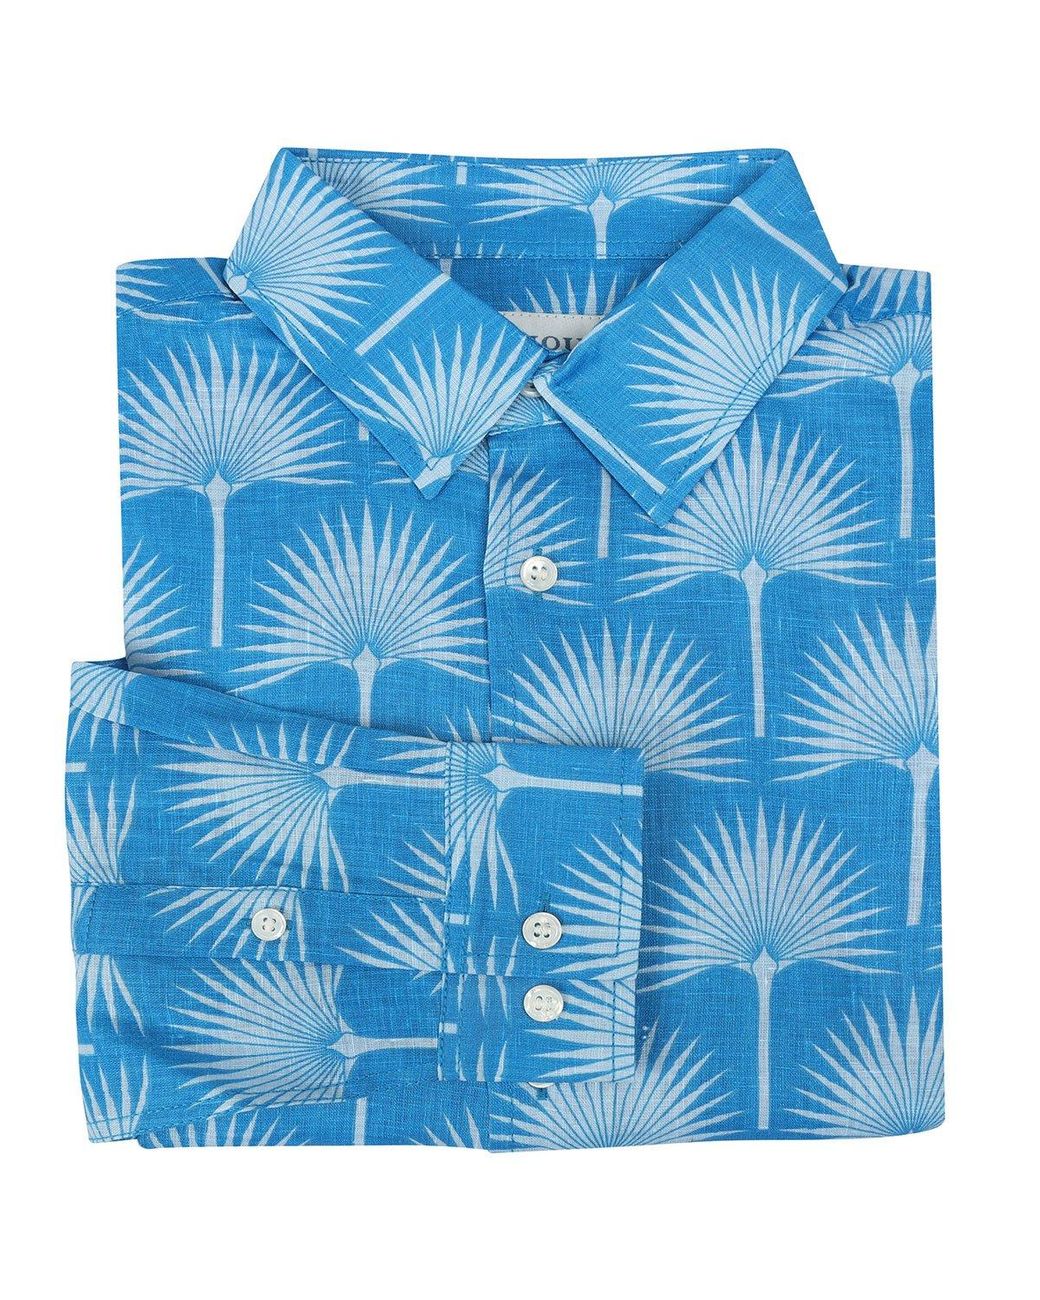 Pink House Mustique Men's Linen Shirt In Fan Palm Pale Blue And Mid ...